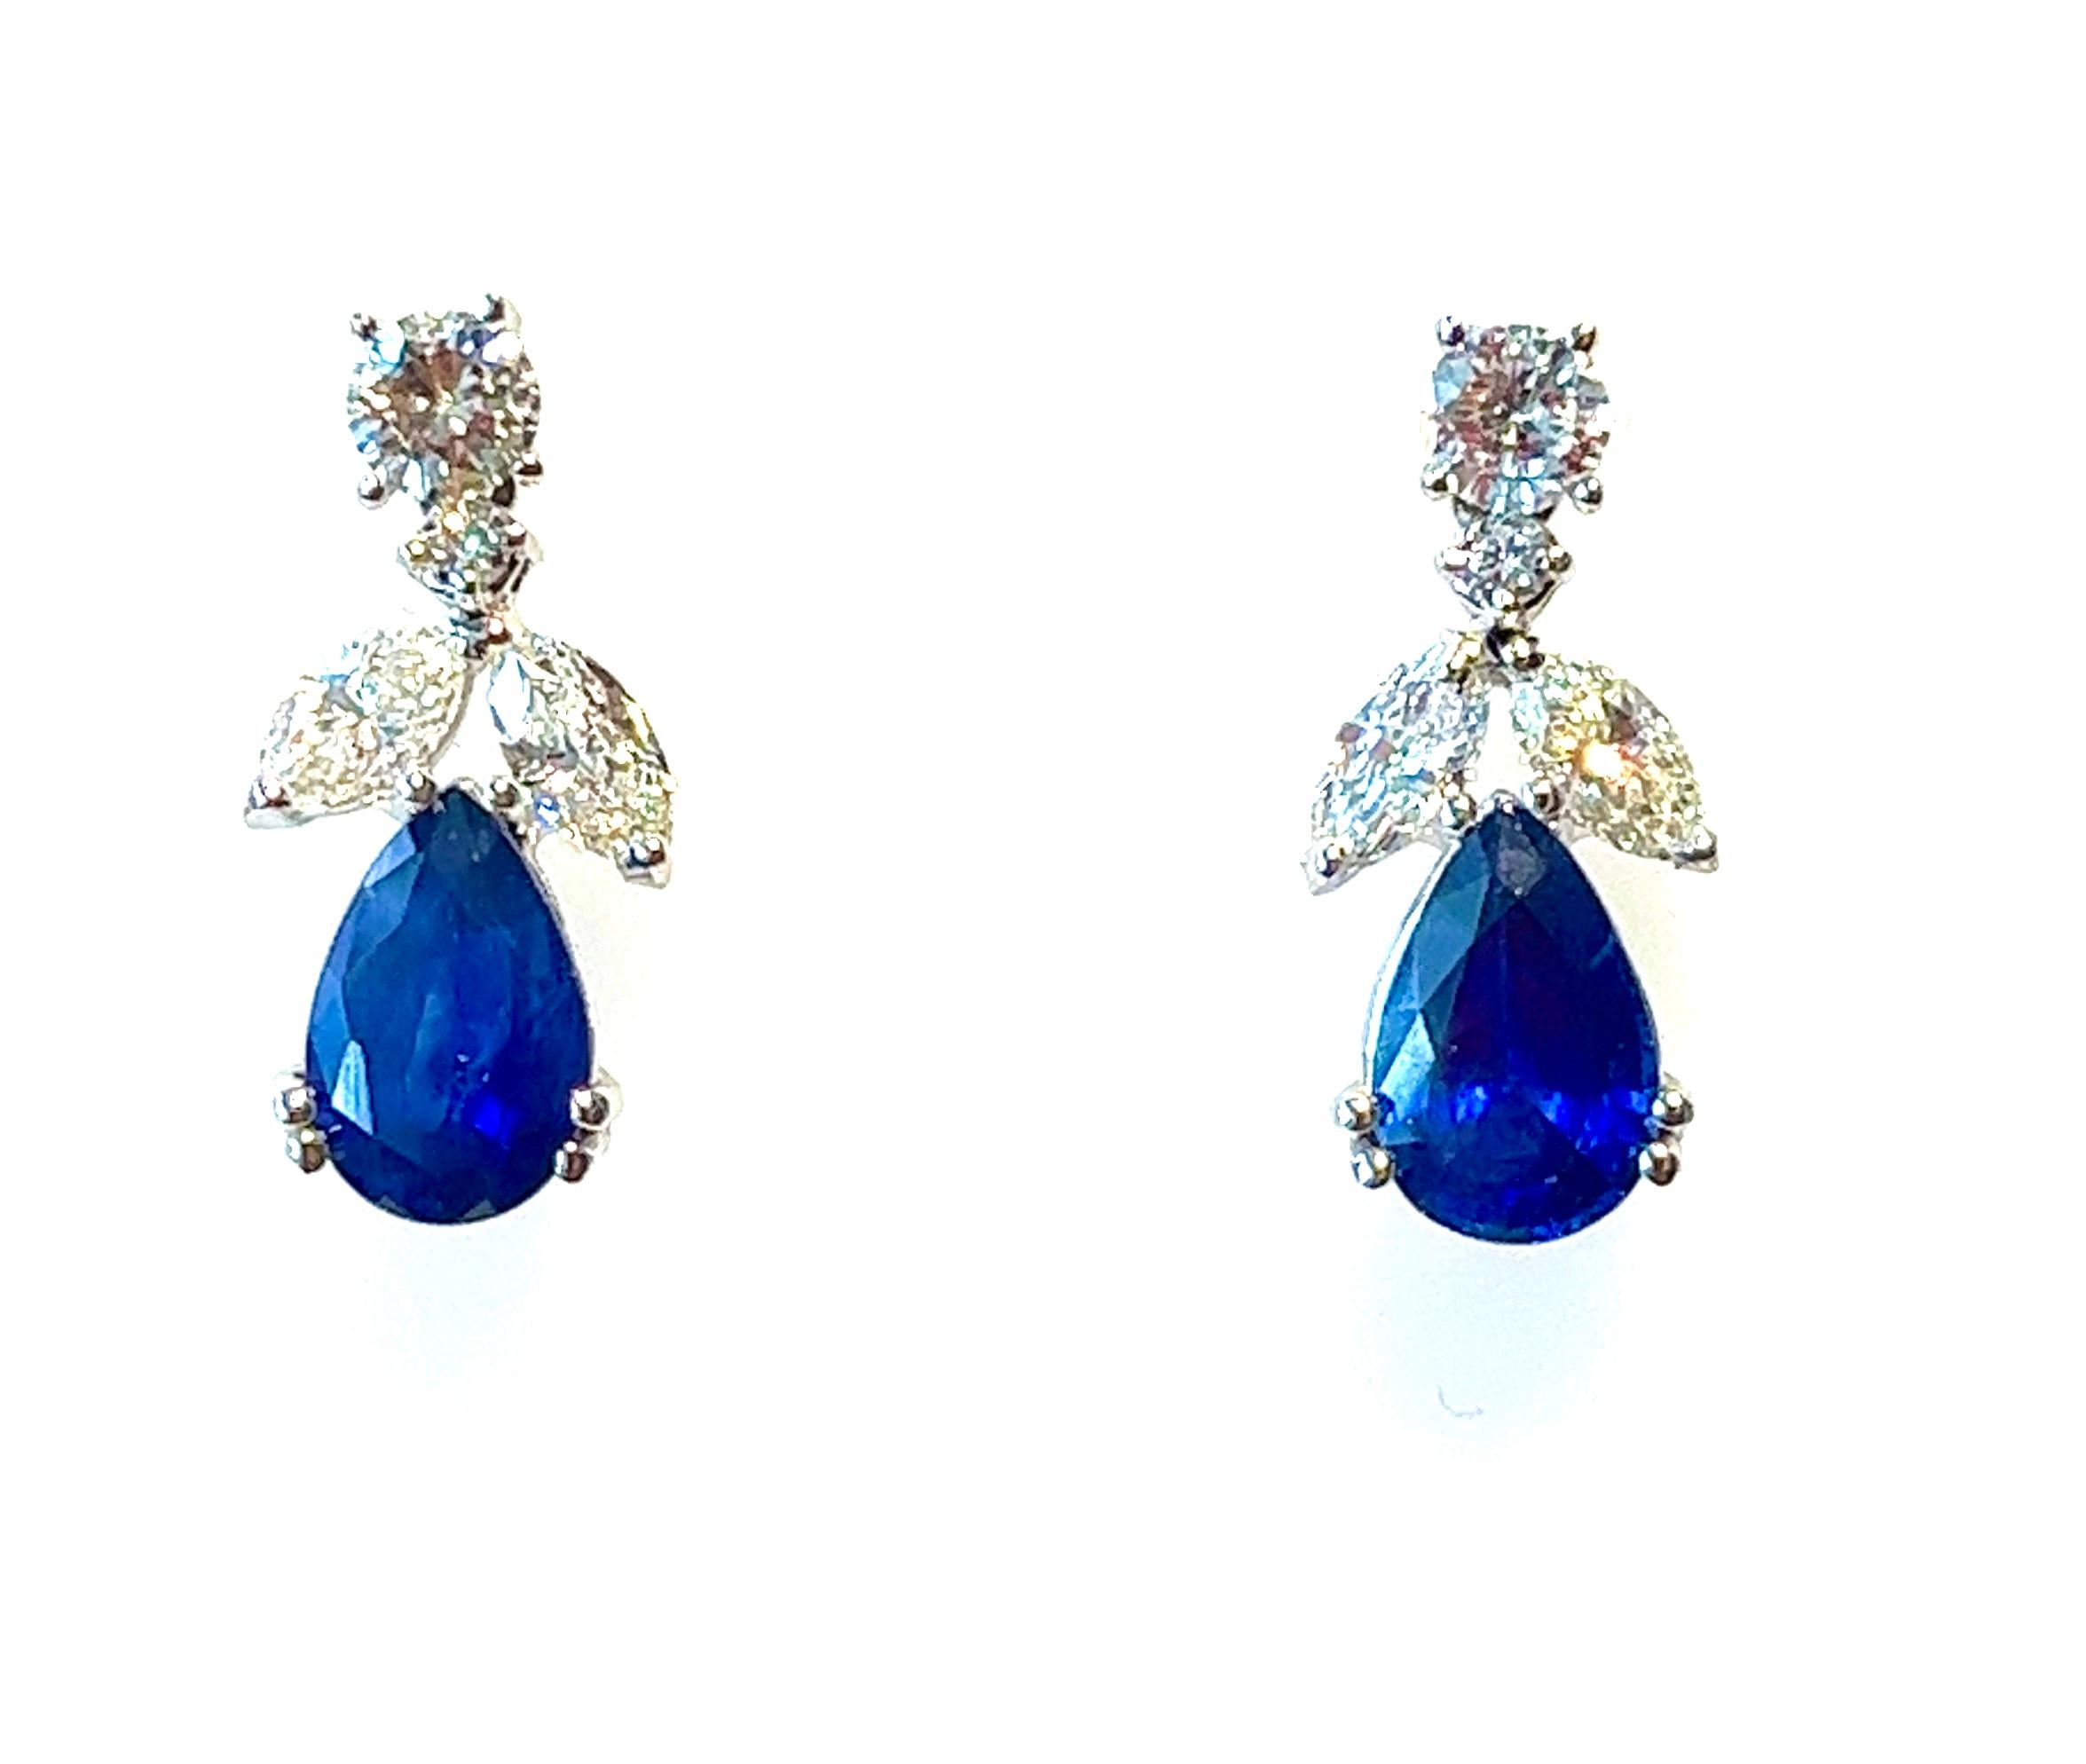 Contemporary 7.01 carat Pear Shape Sapphire and Diamond Earrings, 18kt  For Sale